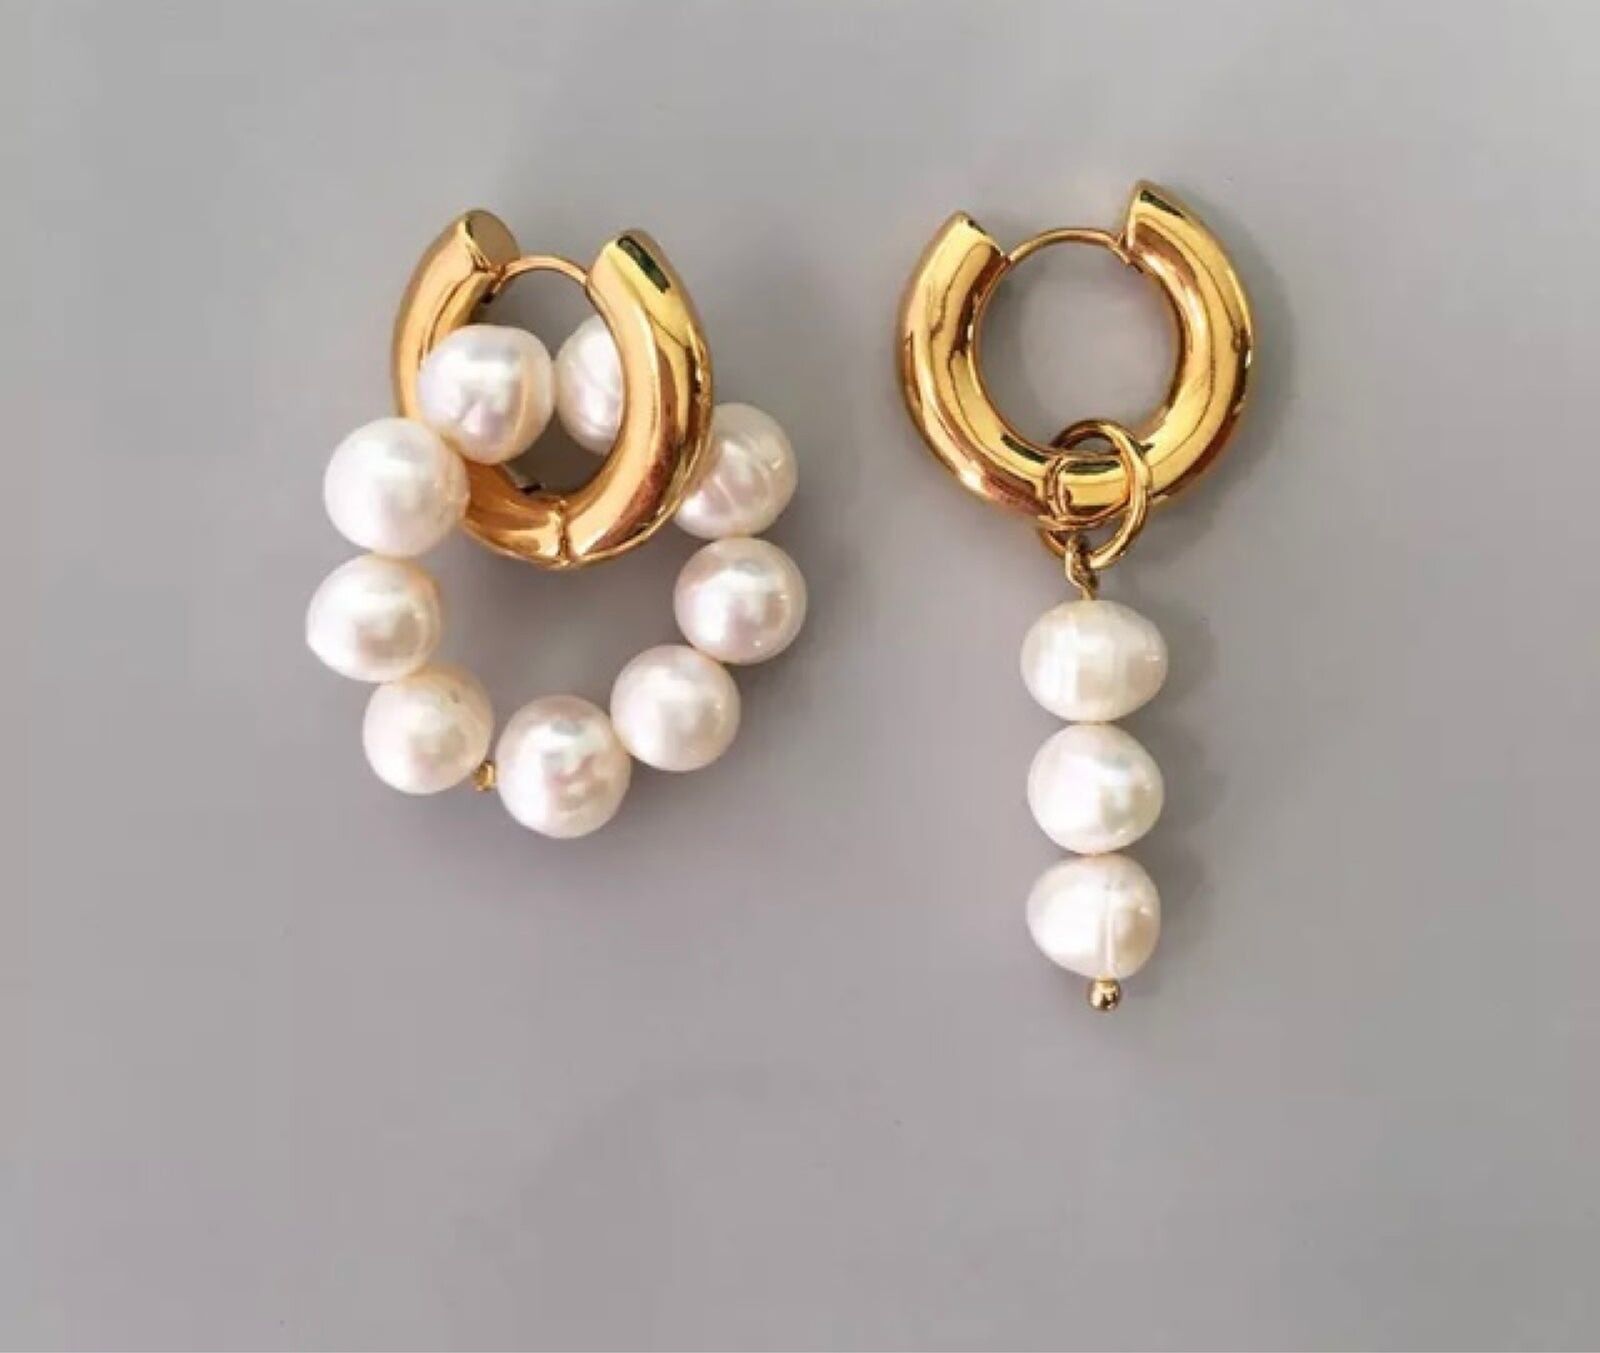 Punk Metal Stainless Golden Round Earclip Earrings For Women Fashion Vintage sty - £9.95 GBP